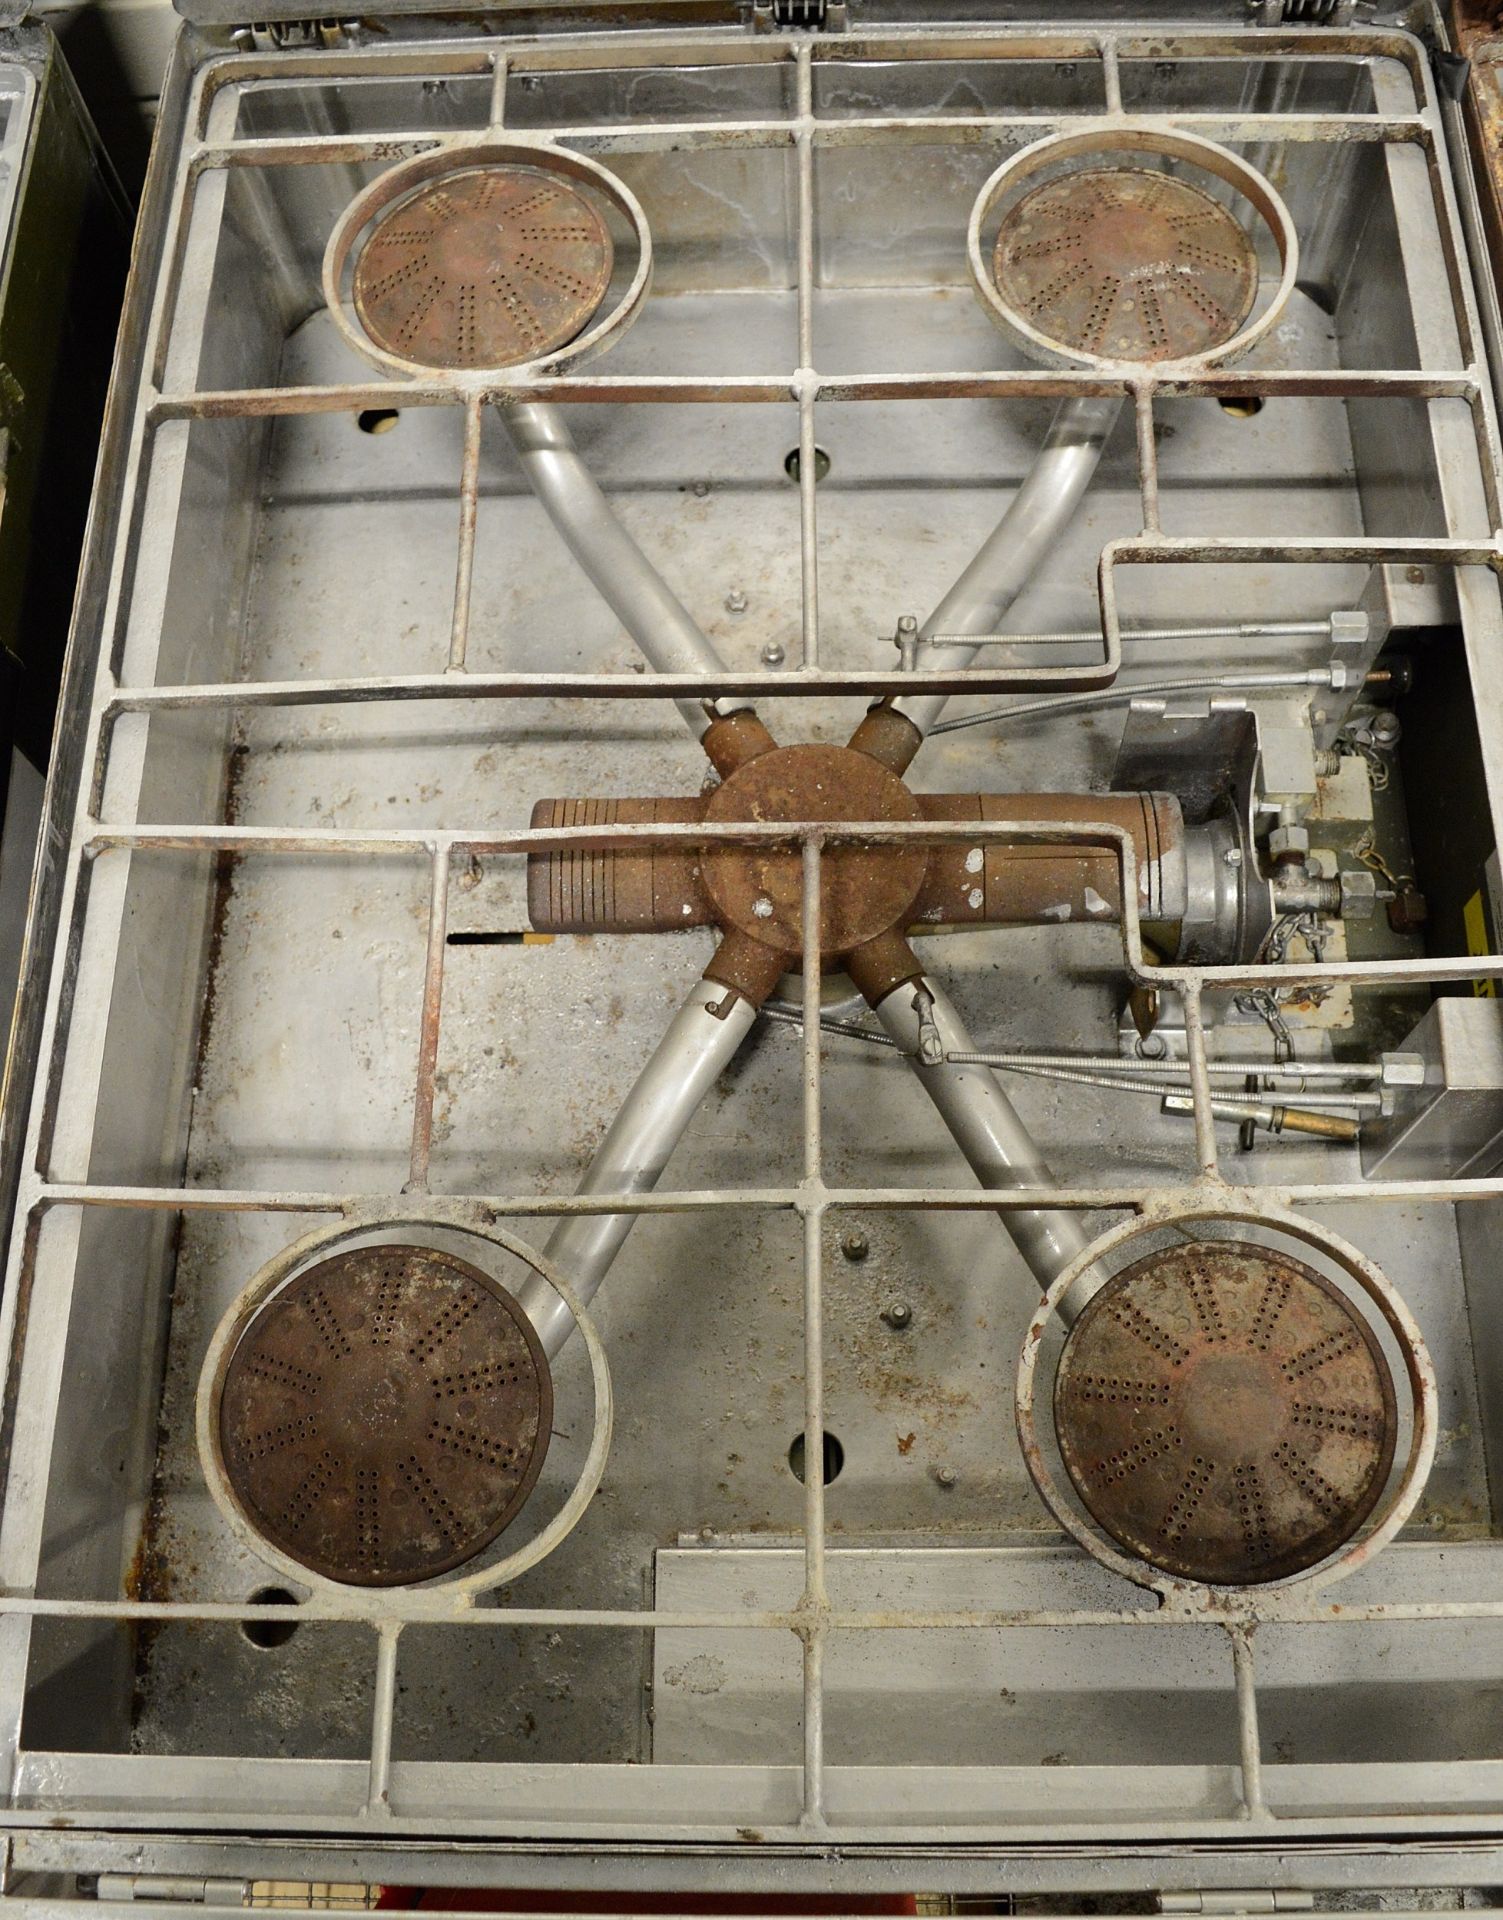 No. 5 Cookset - fold out legs, no gas pipes - Image 2 of 2